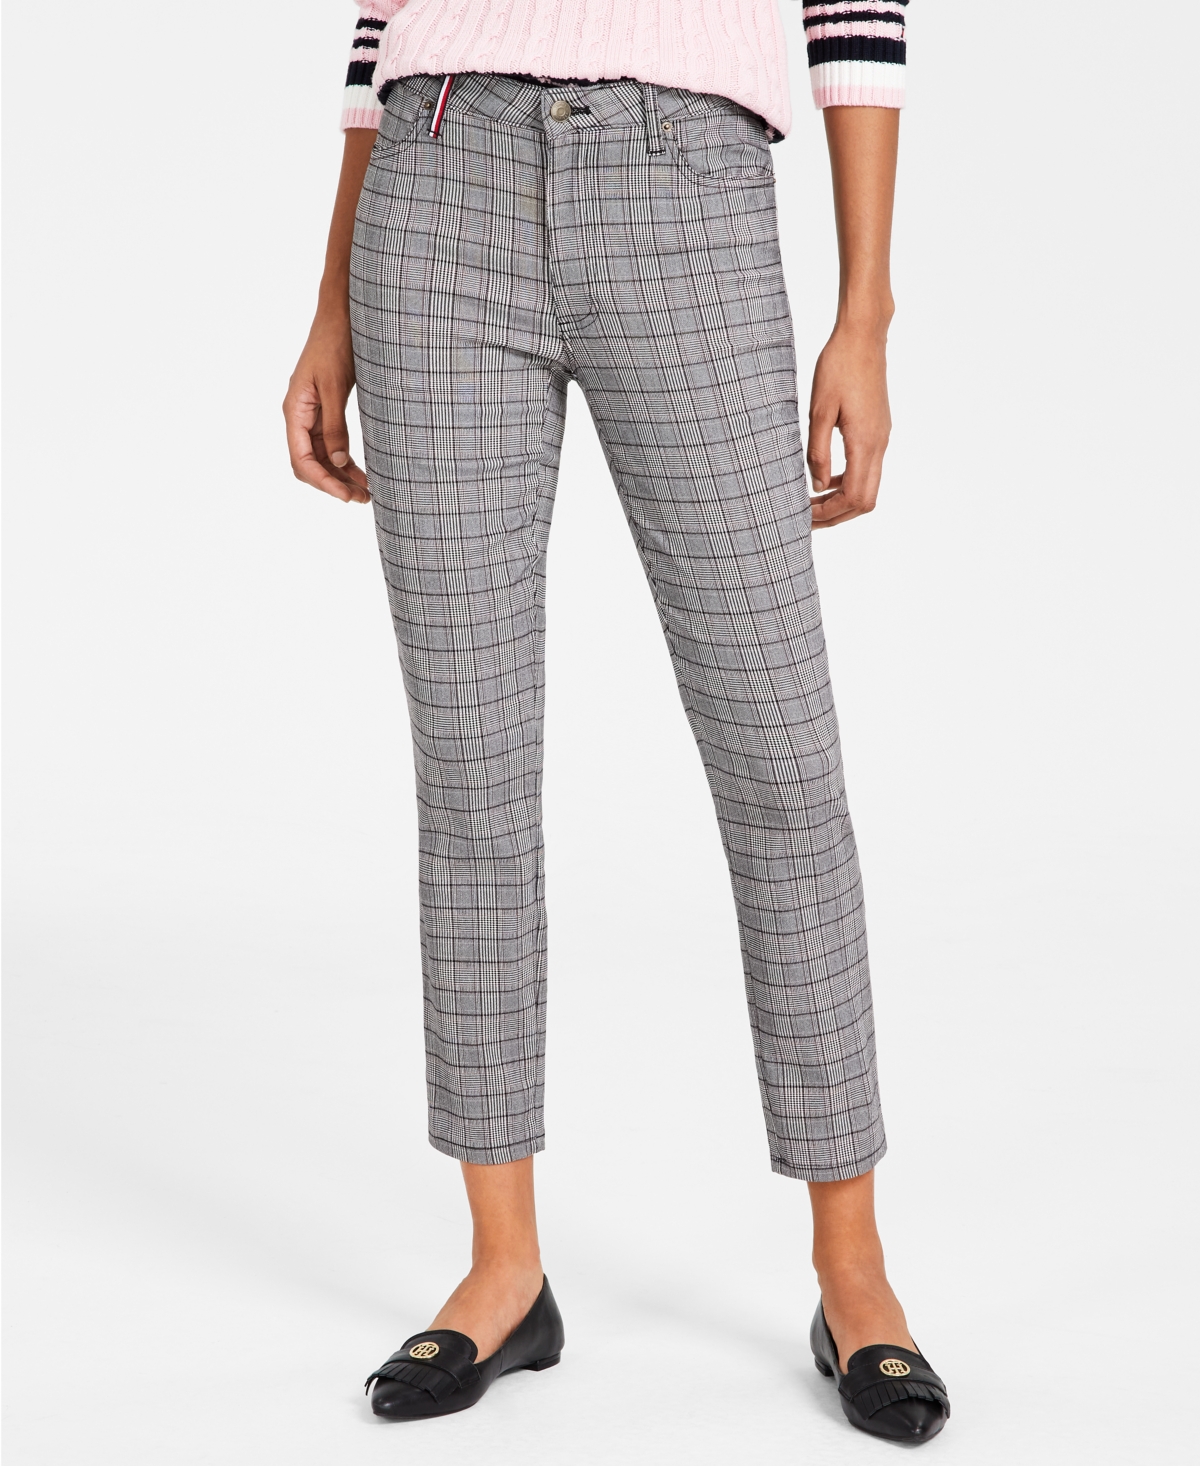 Tommy Hilfiger Women's Printed Skinny Ankle Pants